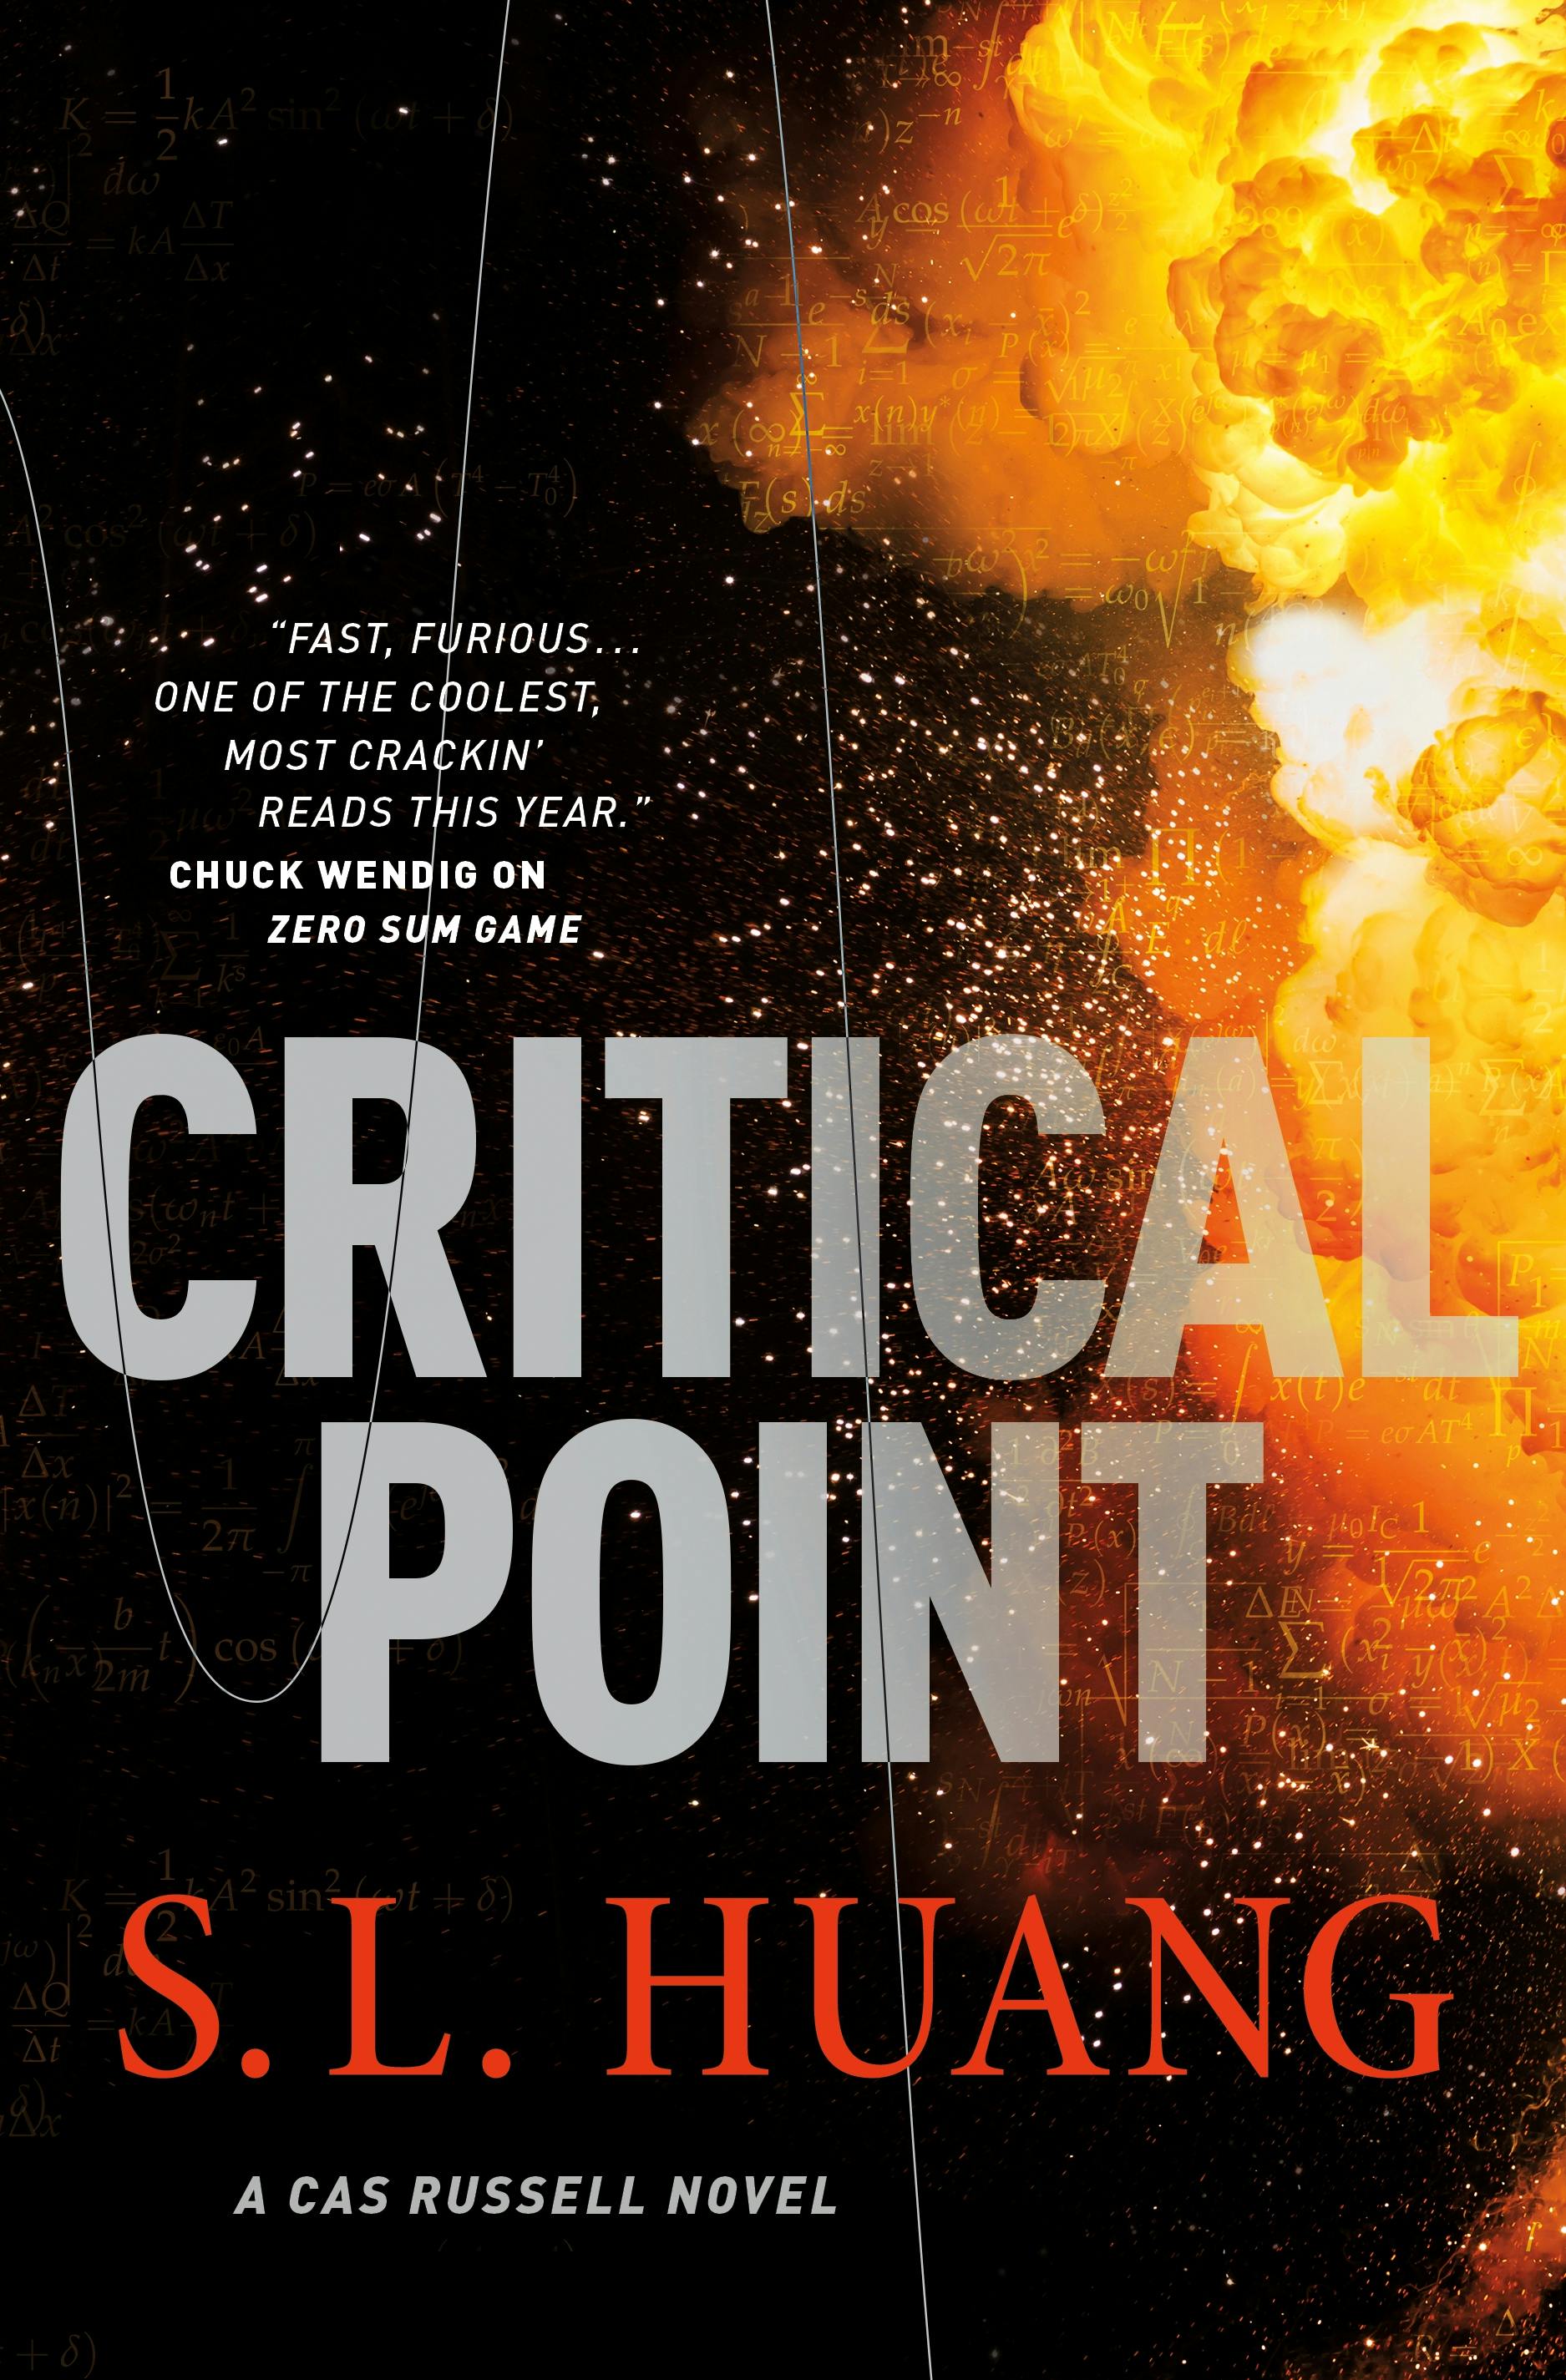 Cover for the book titled as: Critical Point